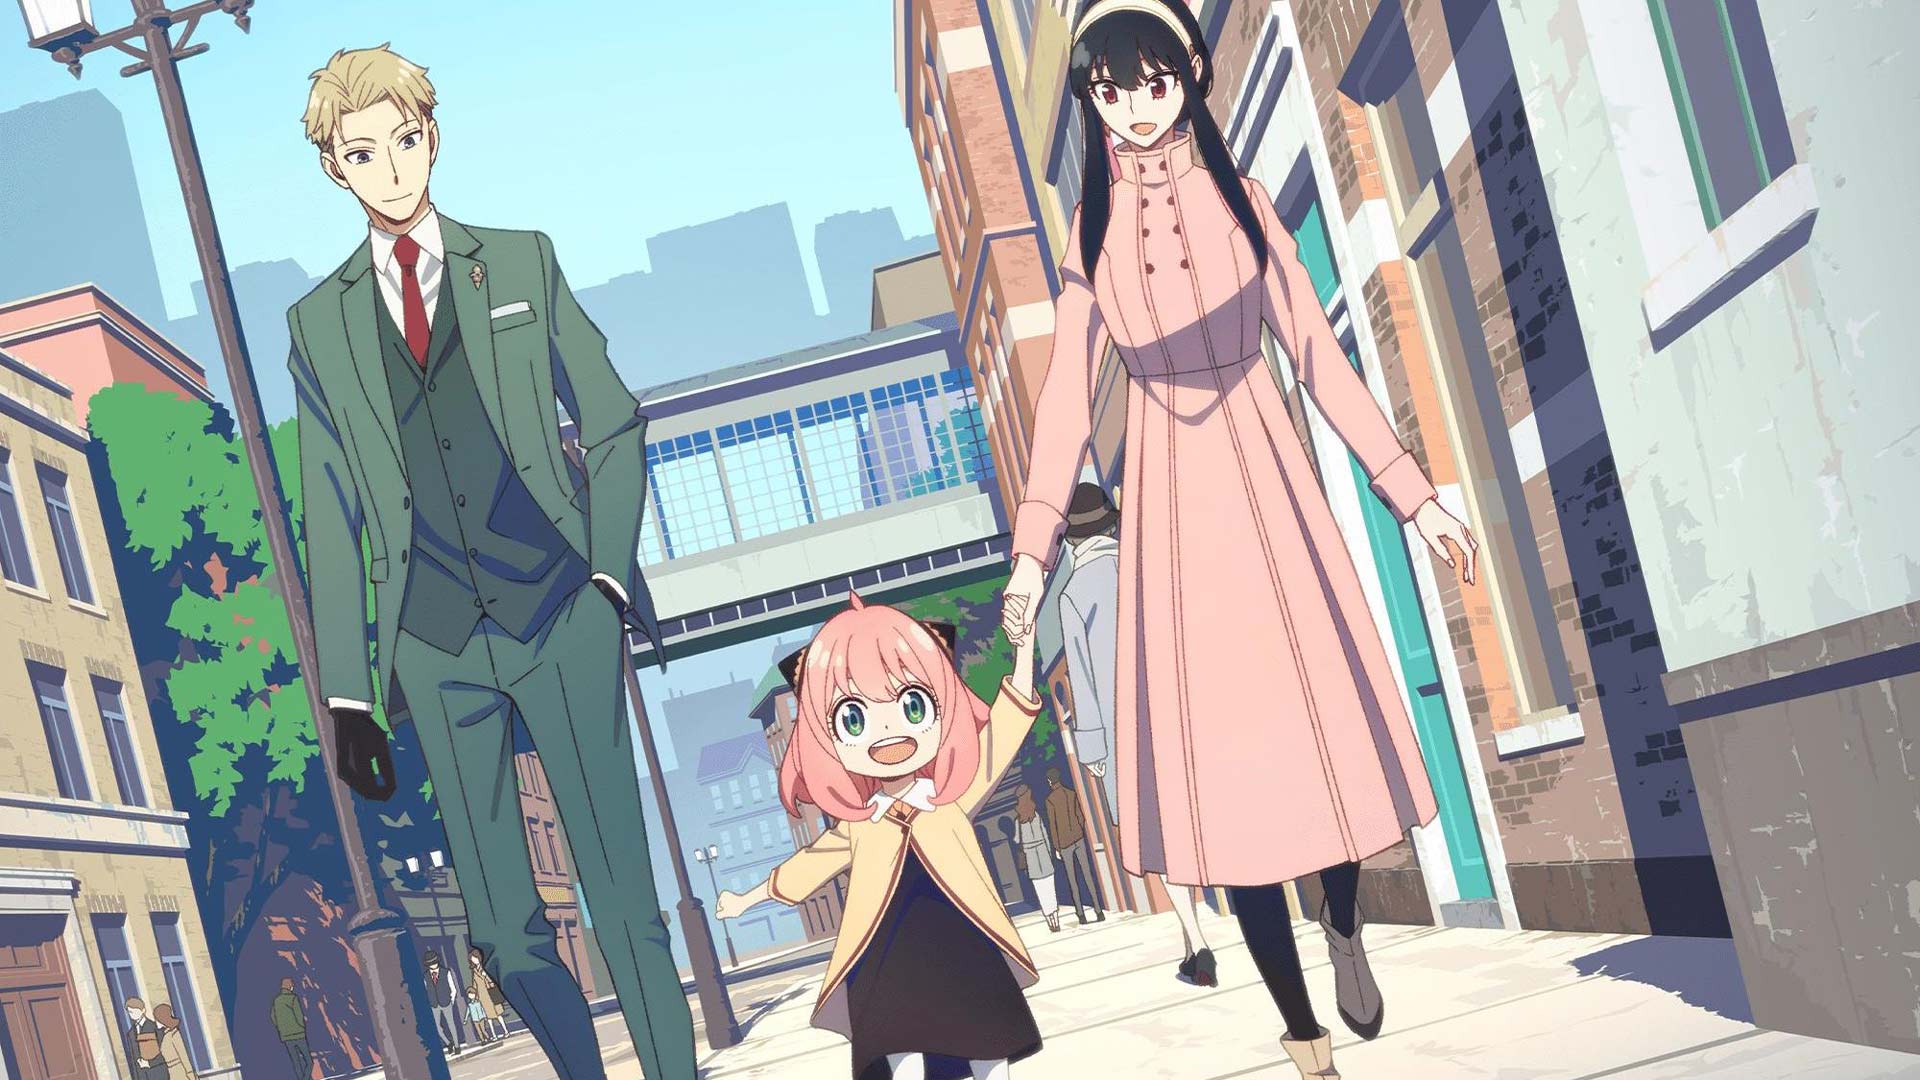 Yuri, Anya and Lloyd Forger walking in the spy family anime